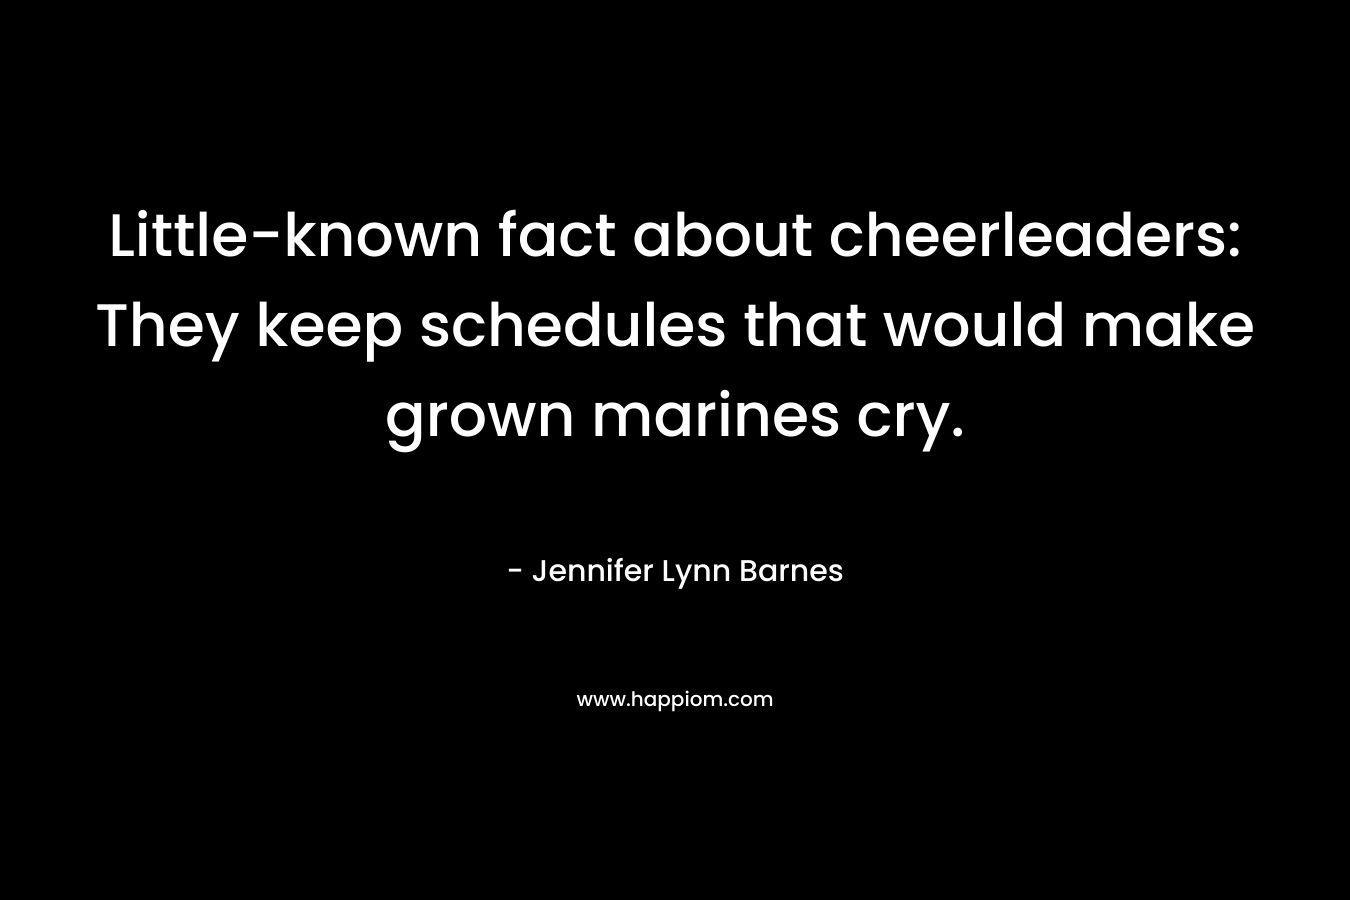 Little-known fact about cheerleaders: They keep schedules that would make grown marines cry.